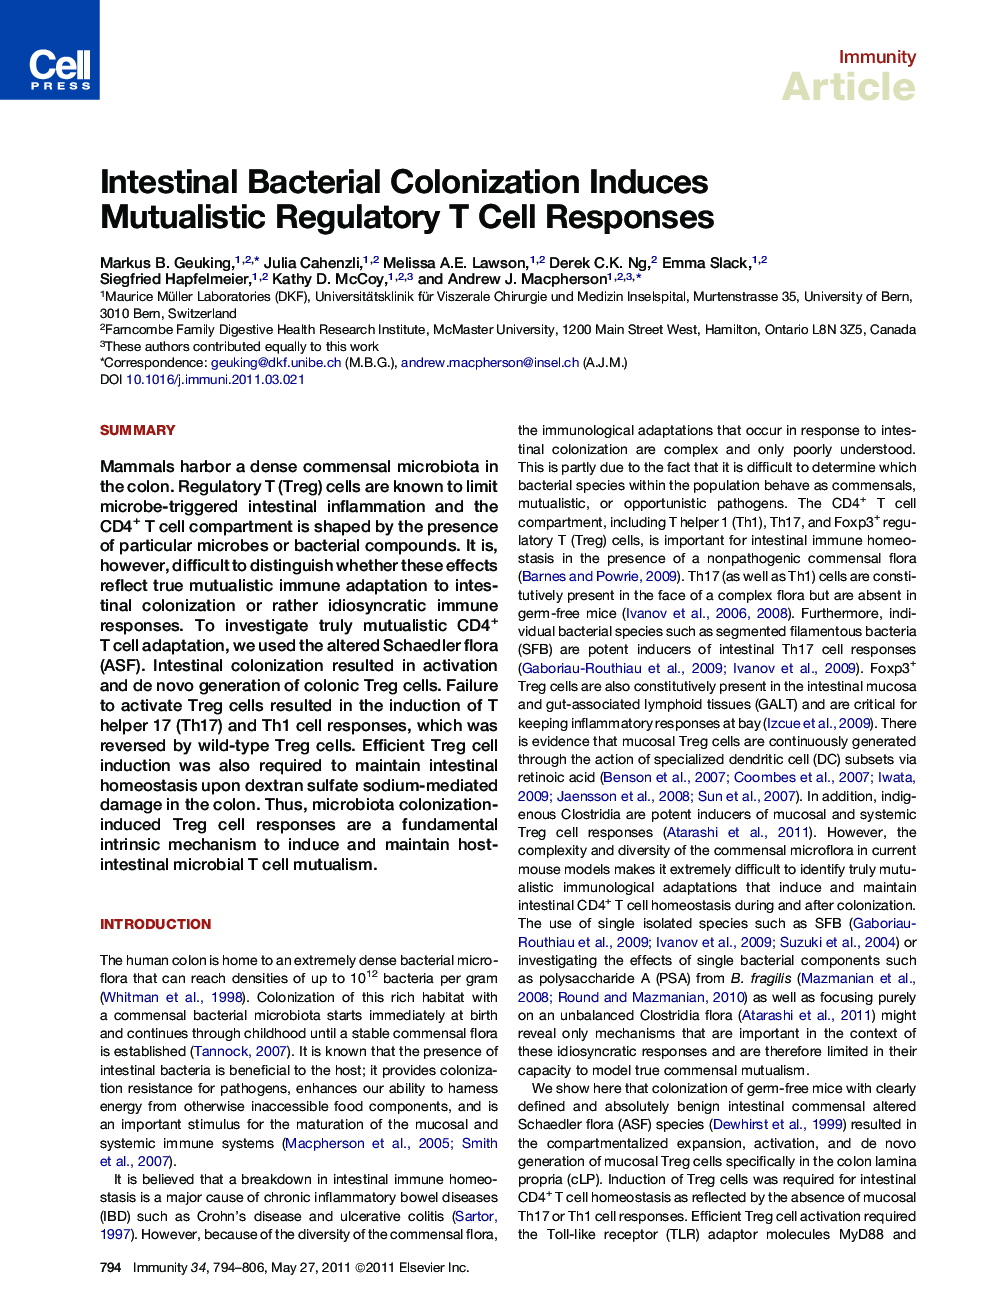 Intestinal Bacterial Colonization Induces Mutualistic Regulatory T Cell Responses